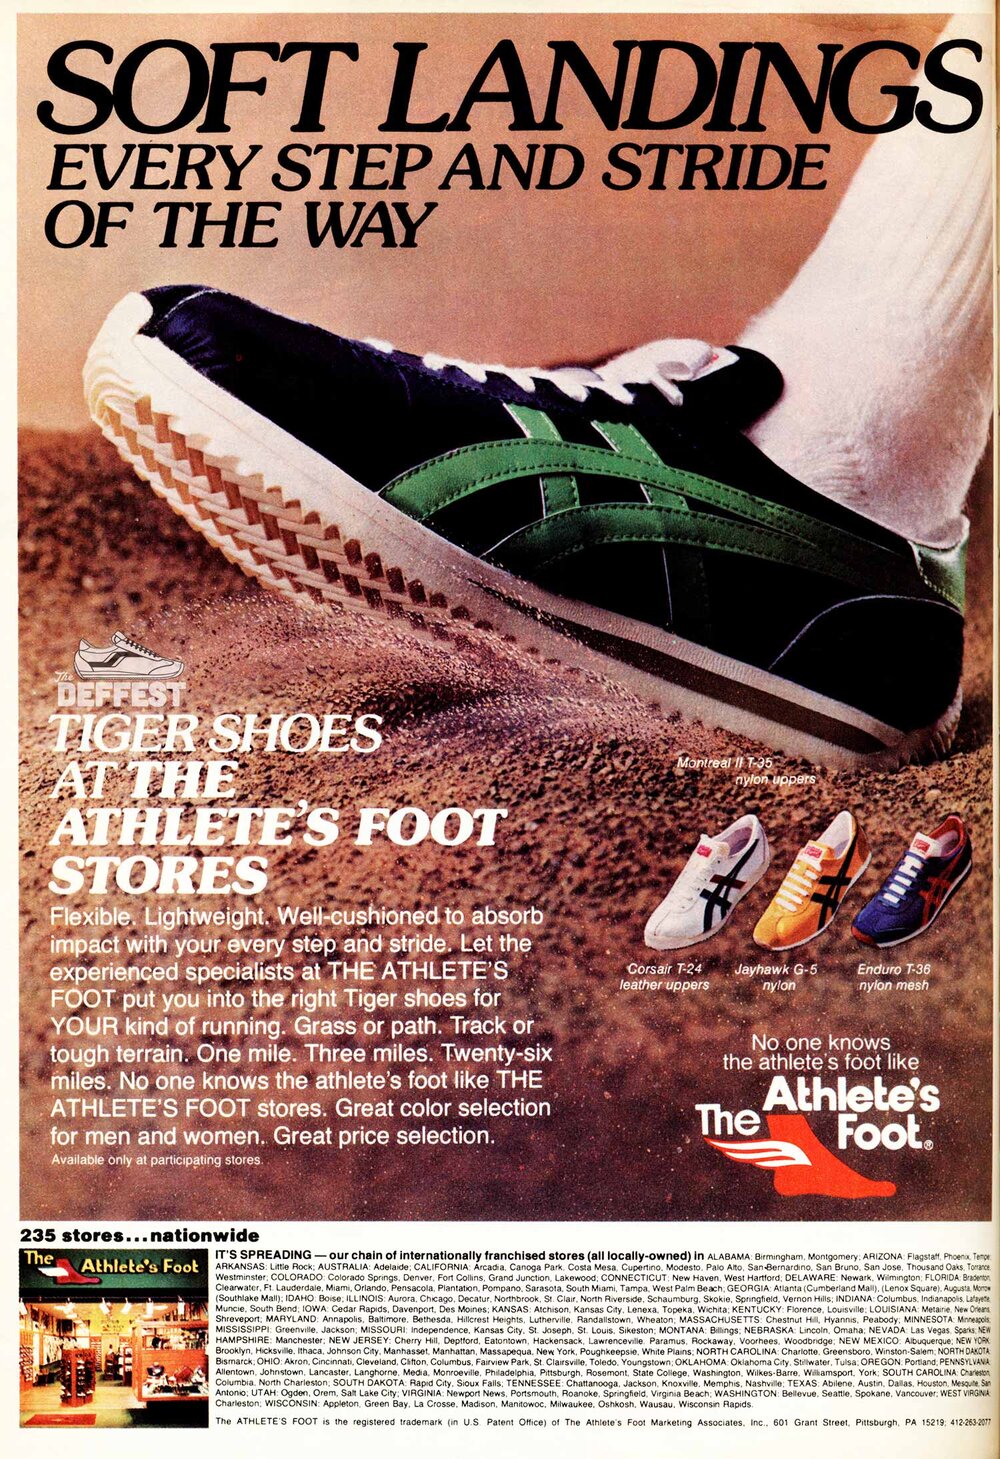 The Deffest®. A and retro sneaker blog. — Asics Onitsuka Tiger 1978 sneaker ad featuring Montreal II, Corsair, Jayhawk and Enduro